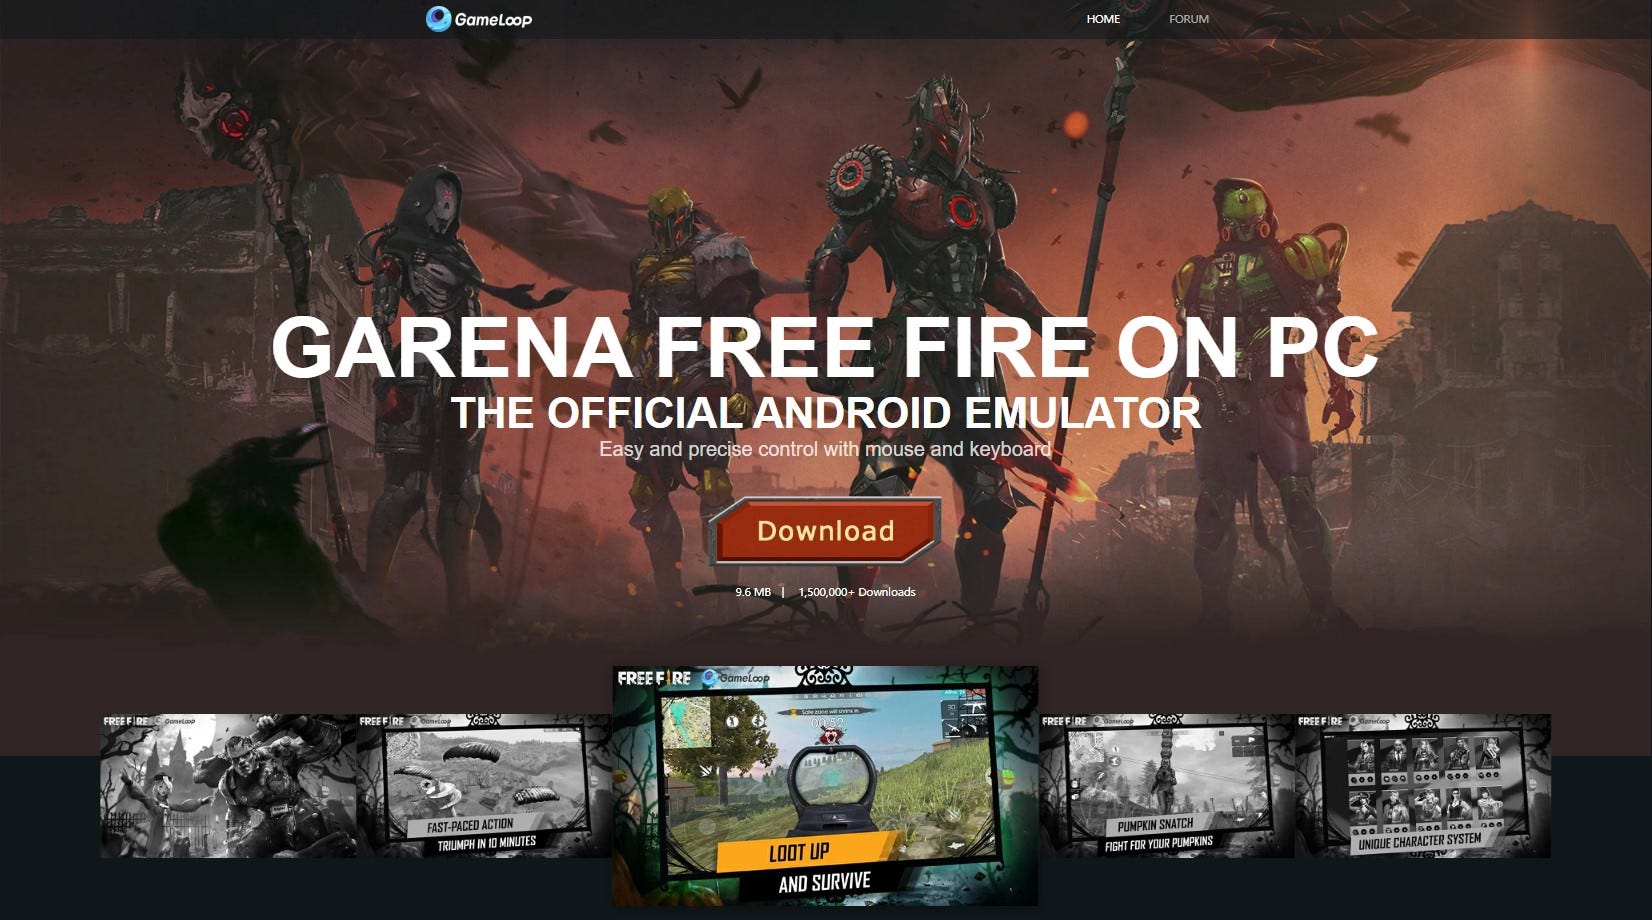 Play Garena Free Fire Mobile on PC with Mouse & keyboard